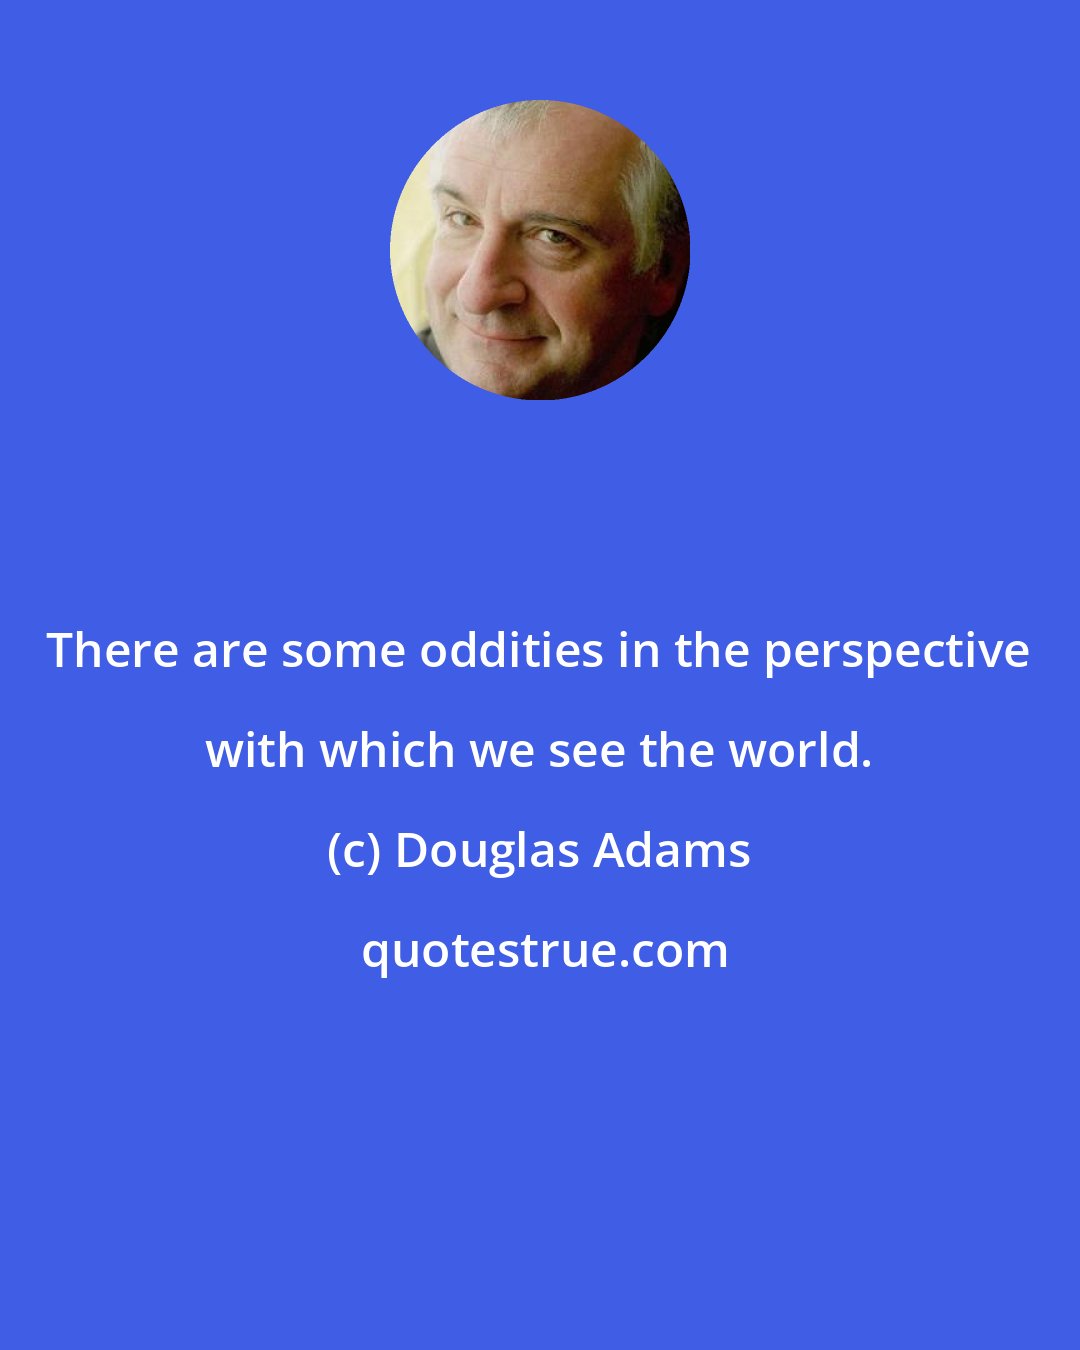 Douglas Adams: There are some oddities in the perspective with which we see the world.